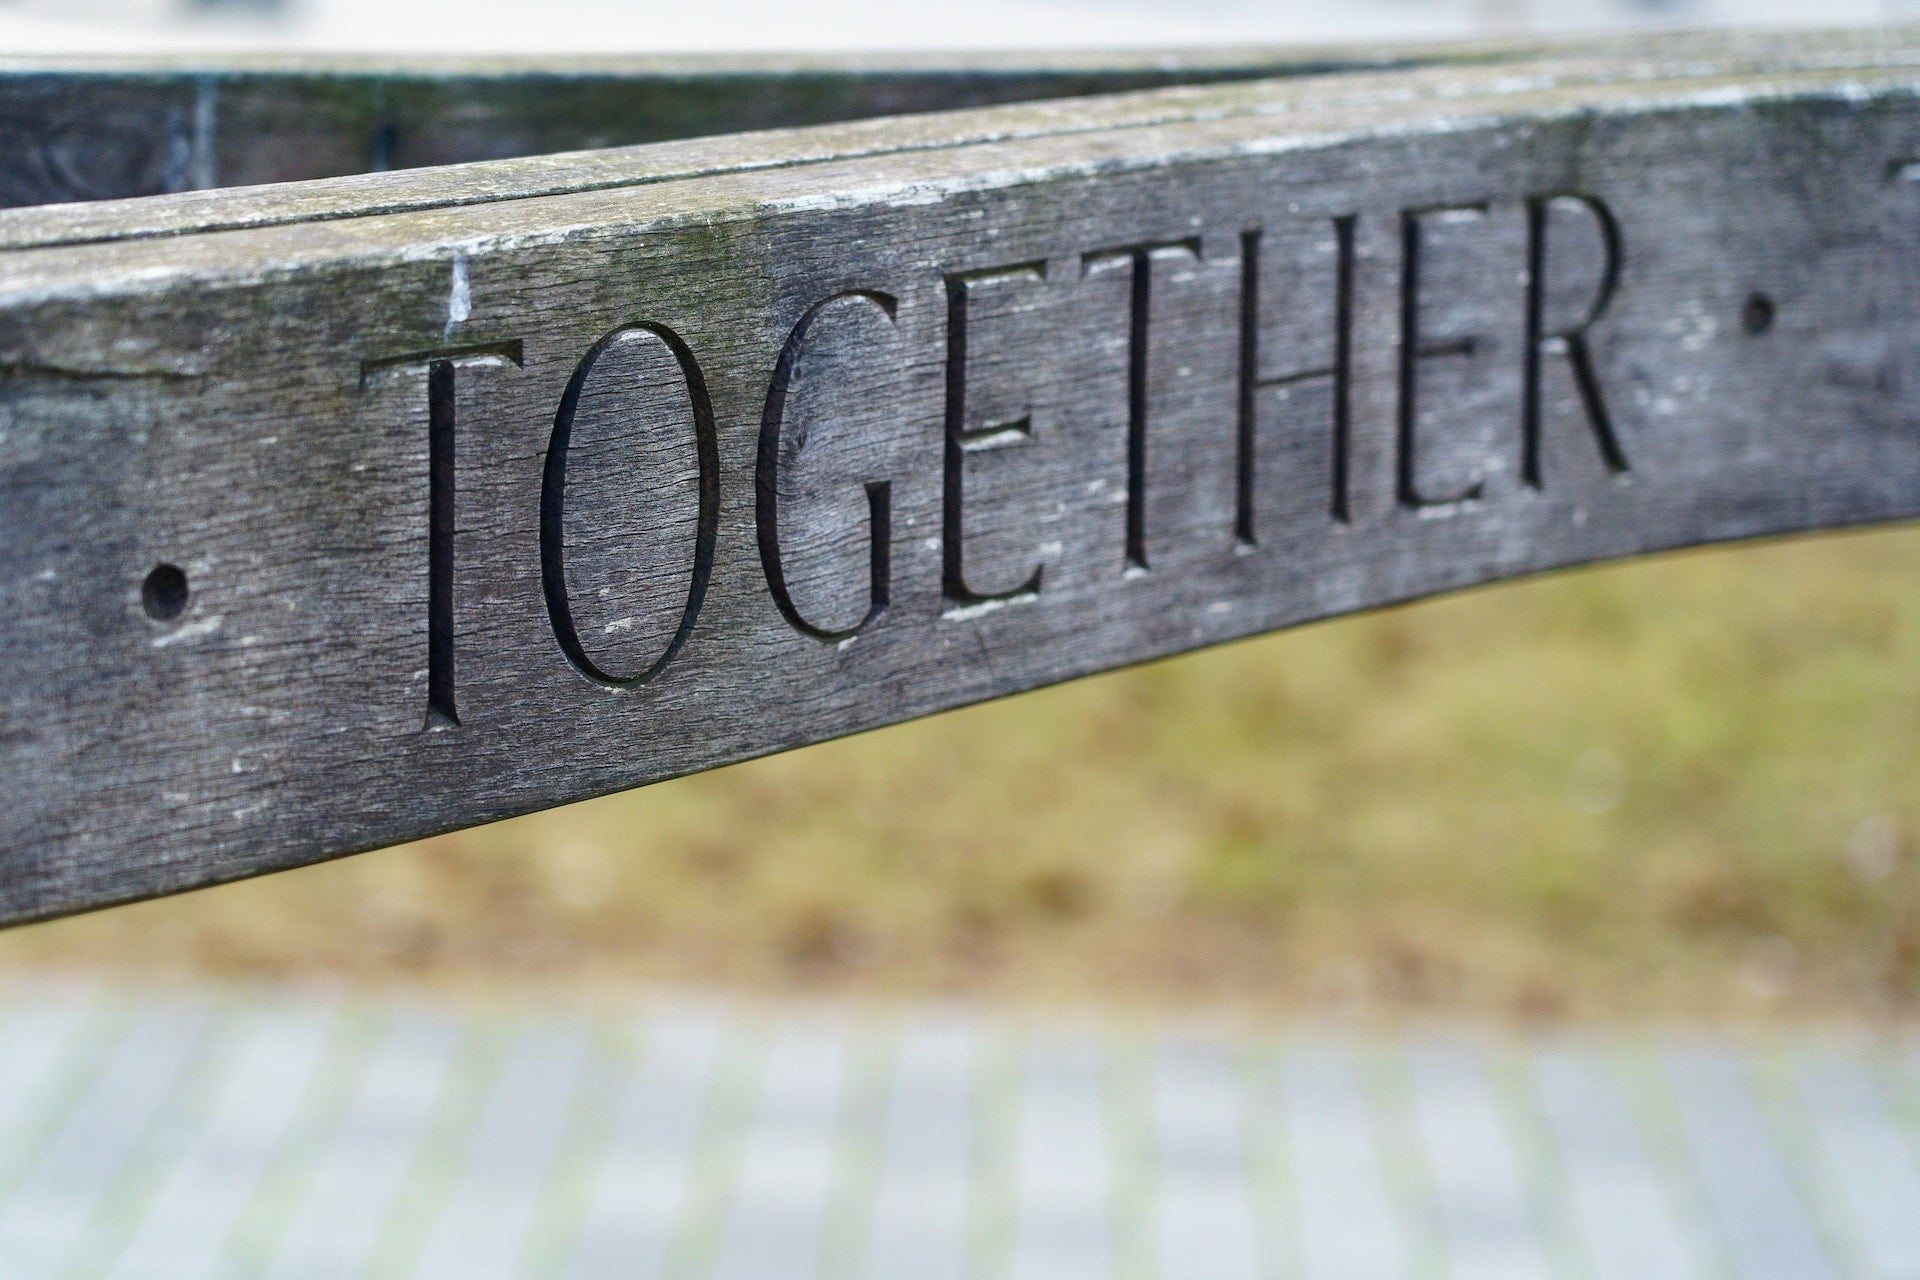 A wooden sign with the word "Together"